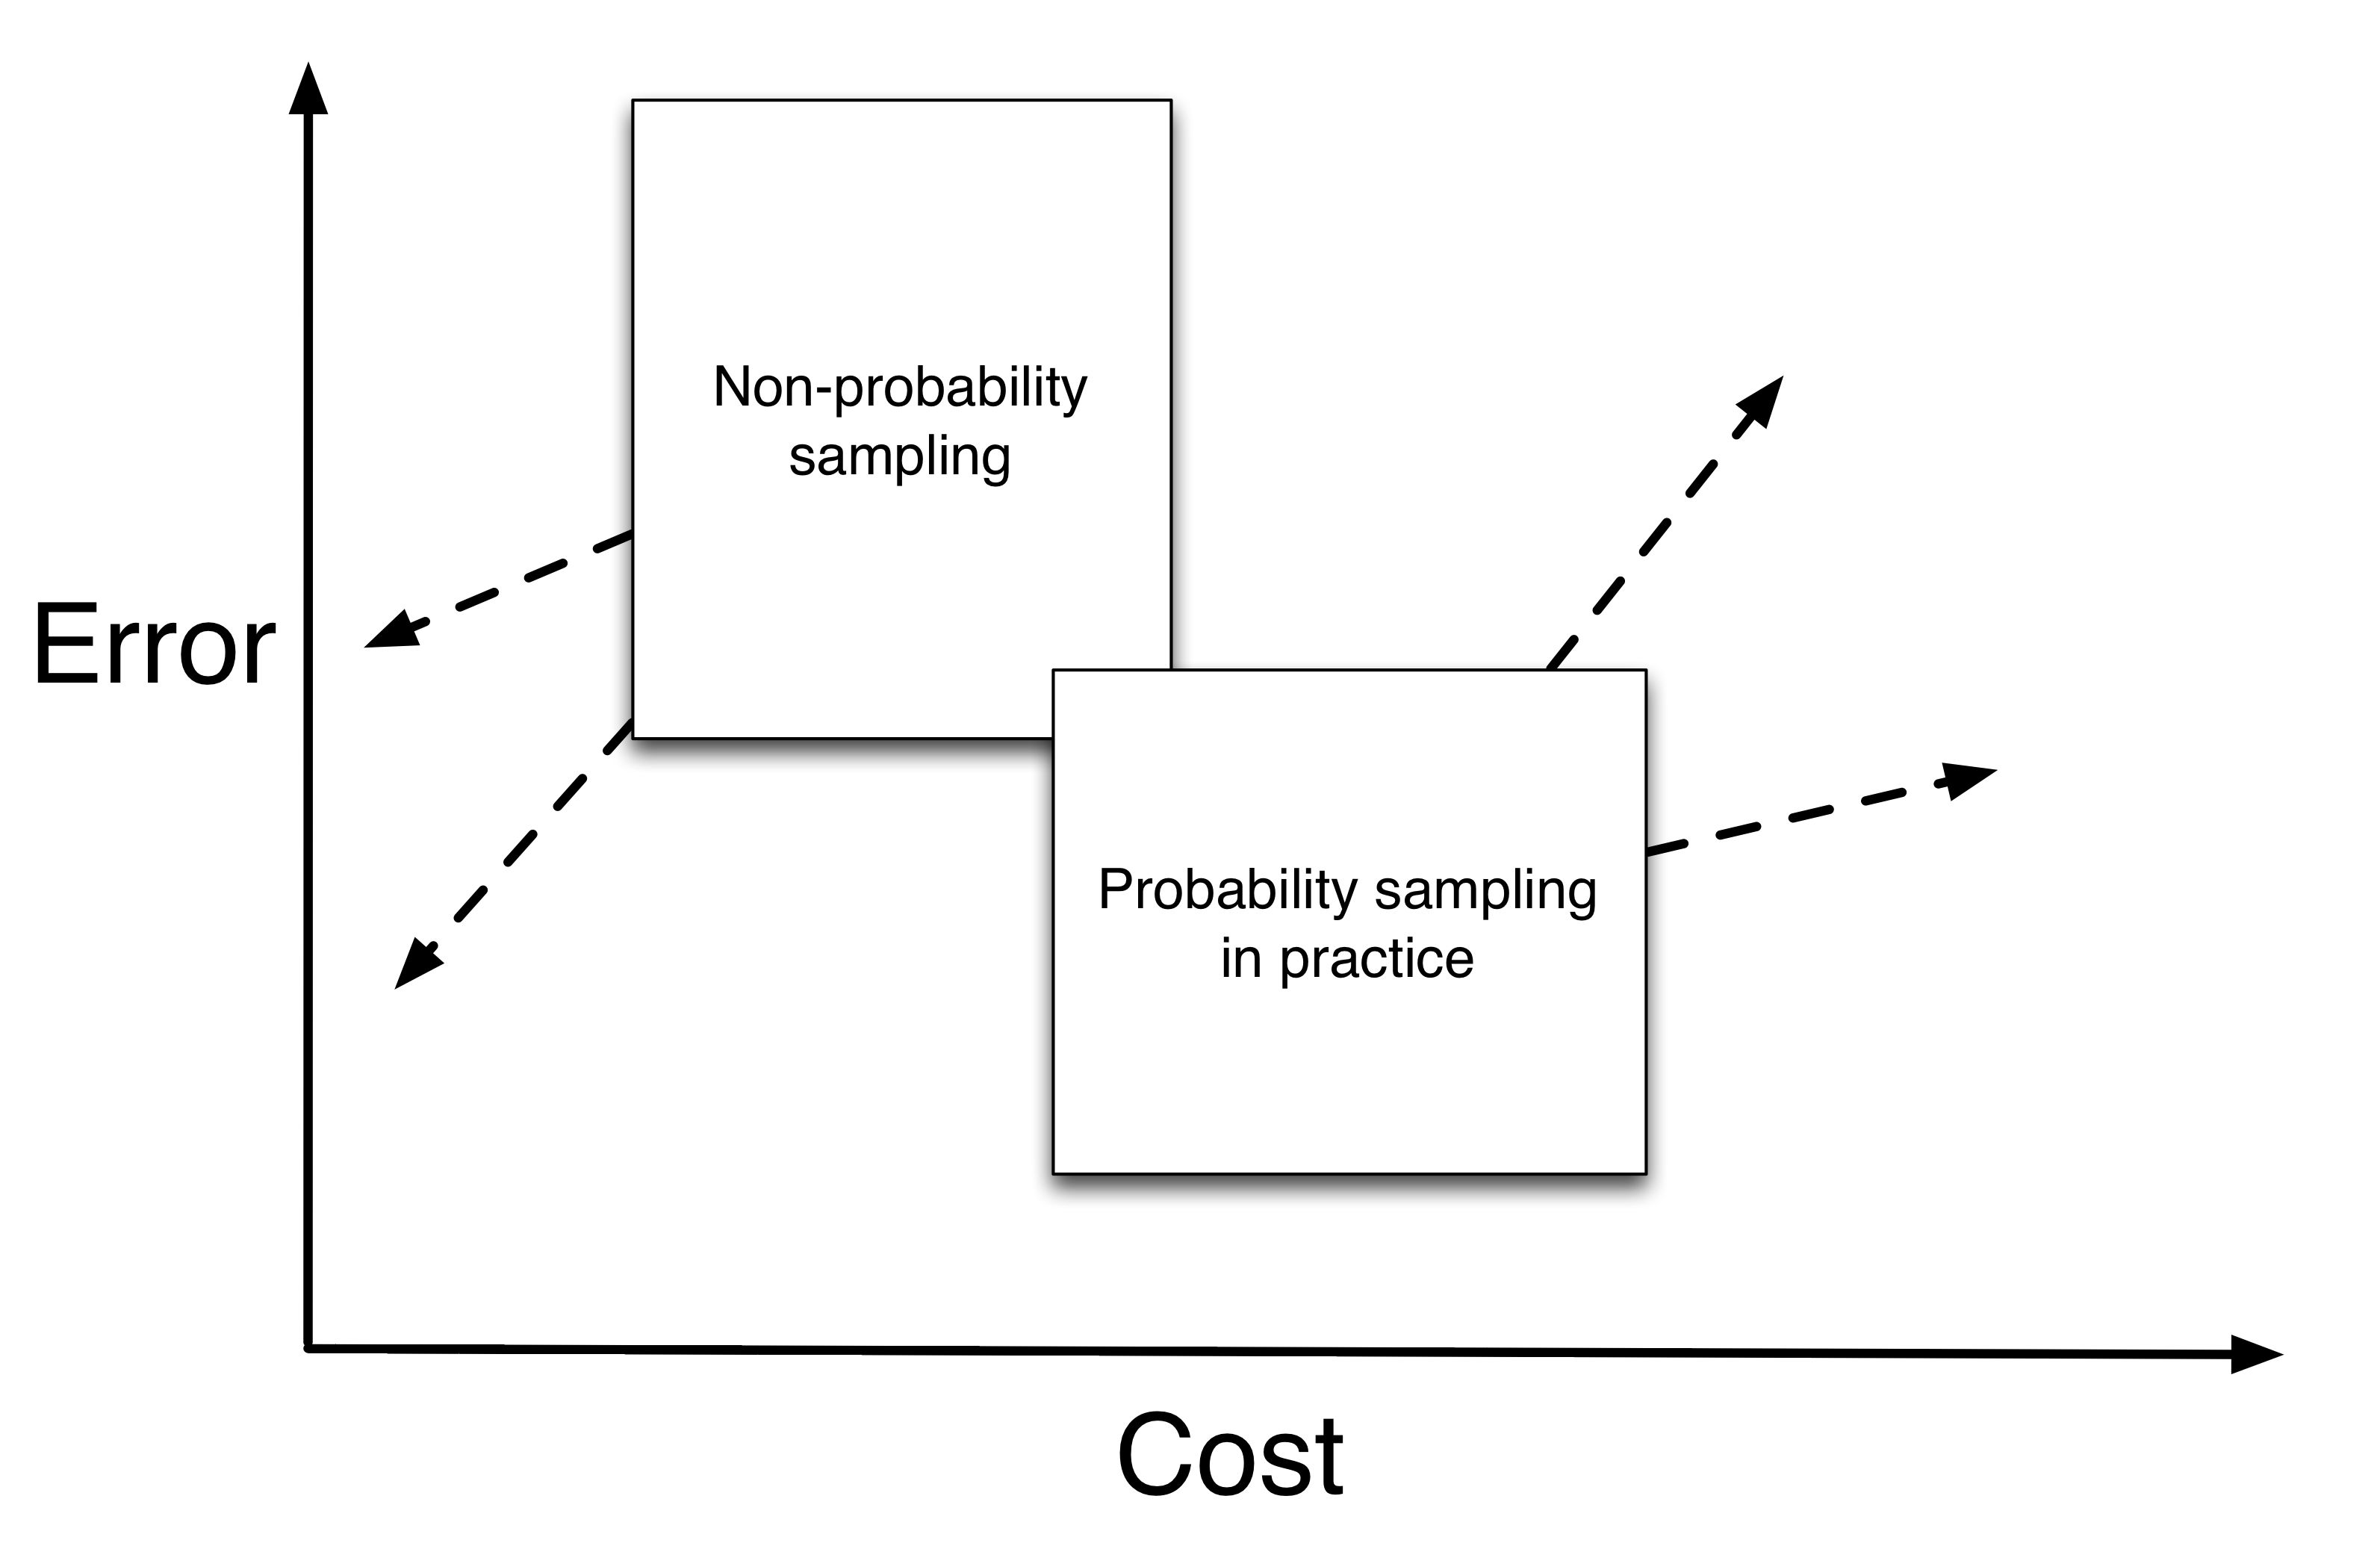 Figure 3.6: Probability sampling in practice and non-probability sampling are both large, heterogeneous categories. In general, there is a cost-error trade-off with non-probability sampling being lower cost but higher error. However, well-done non-probability sampling can produce better estimates than poorly-done probability sampling. In the future, I expect that non-probability sampling will get better and cheaper while probability sampling will get worse and more expensive.